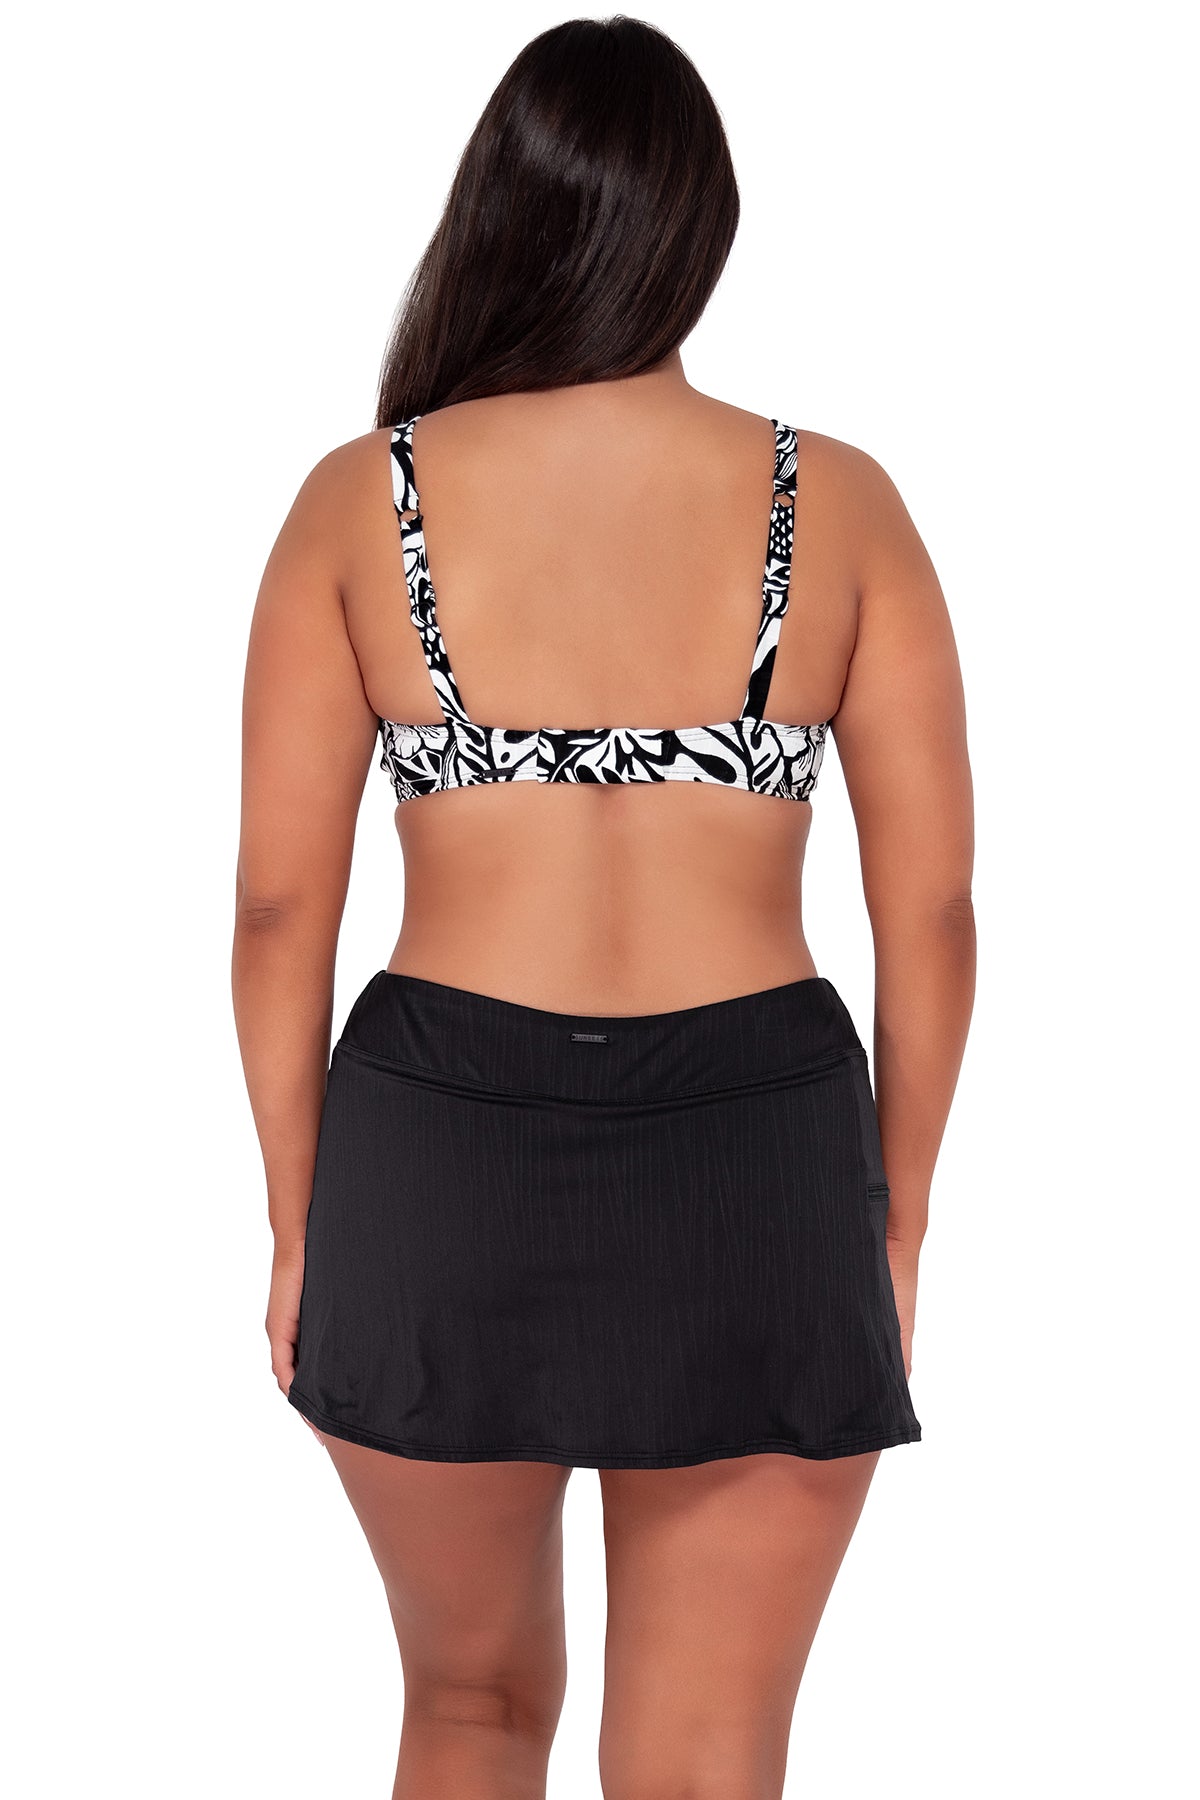 Back pose #1 of Nicki wearing Sunsets Caribbean Seagrass Texture Kauai Keyhole Top paired with Sporty Swim Skirt swim bottom